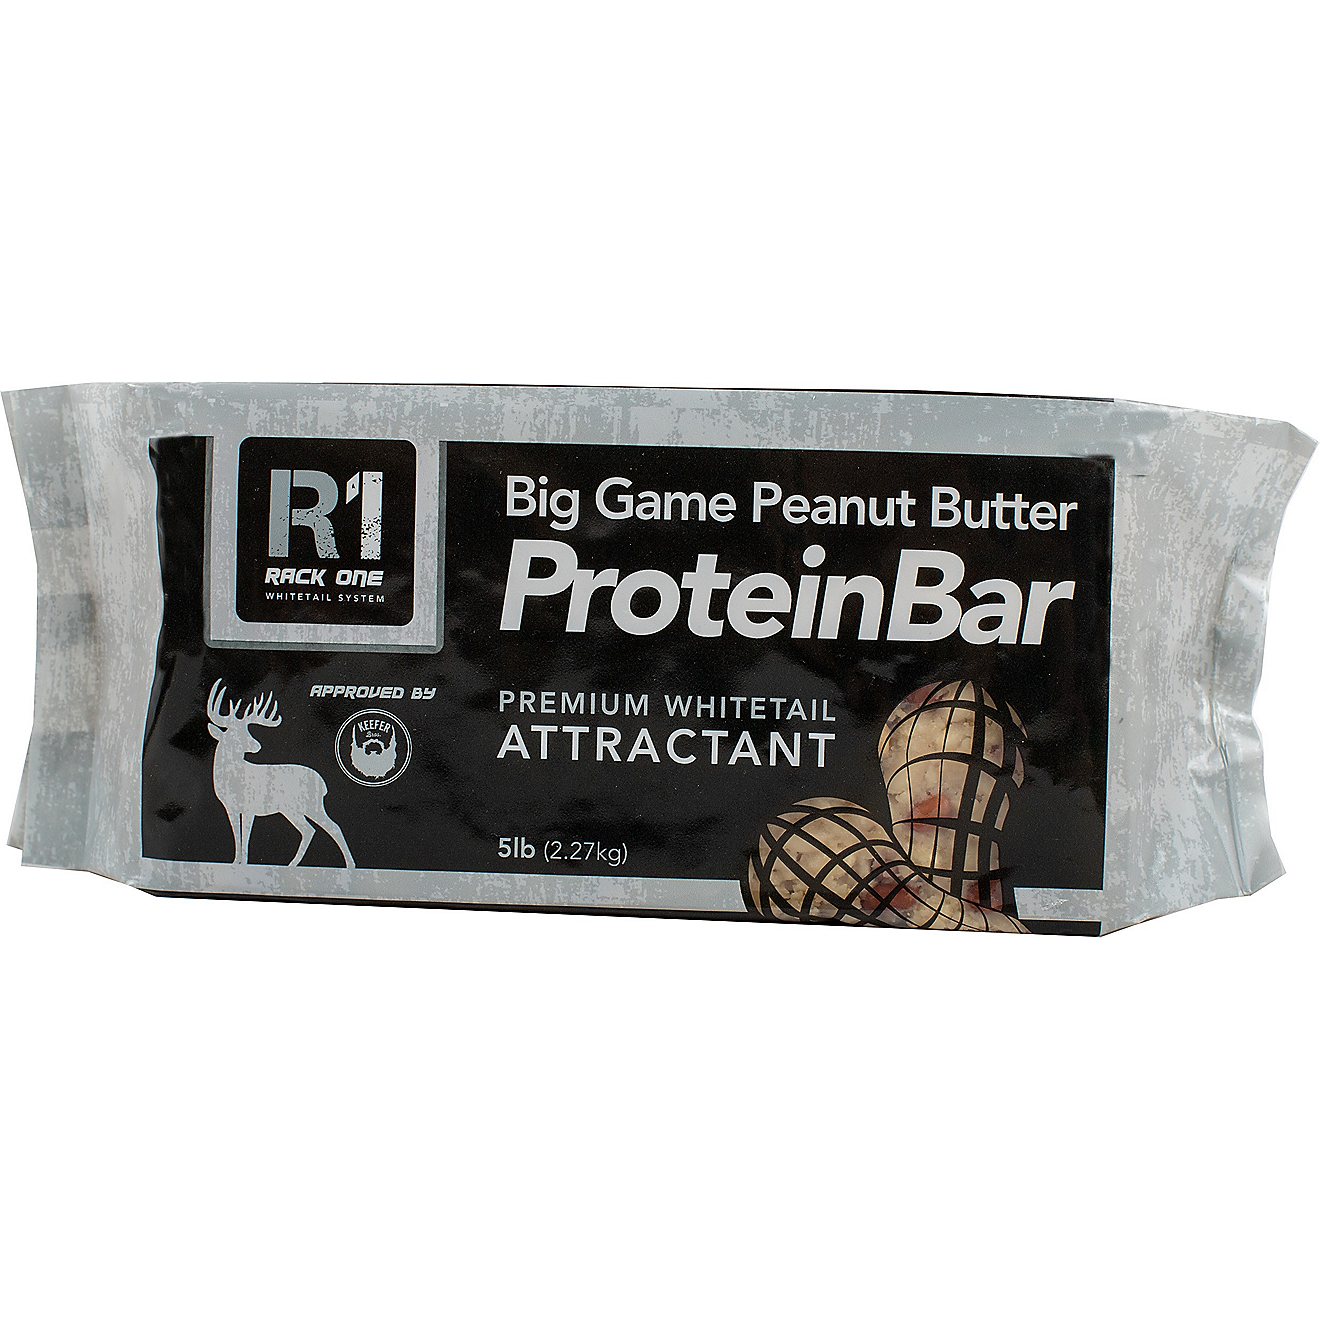 Rack One Big Game Peanut Butter Protein Bar 5 lb Premium Whitetail Attractant                                                    - view number 1